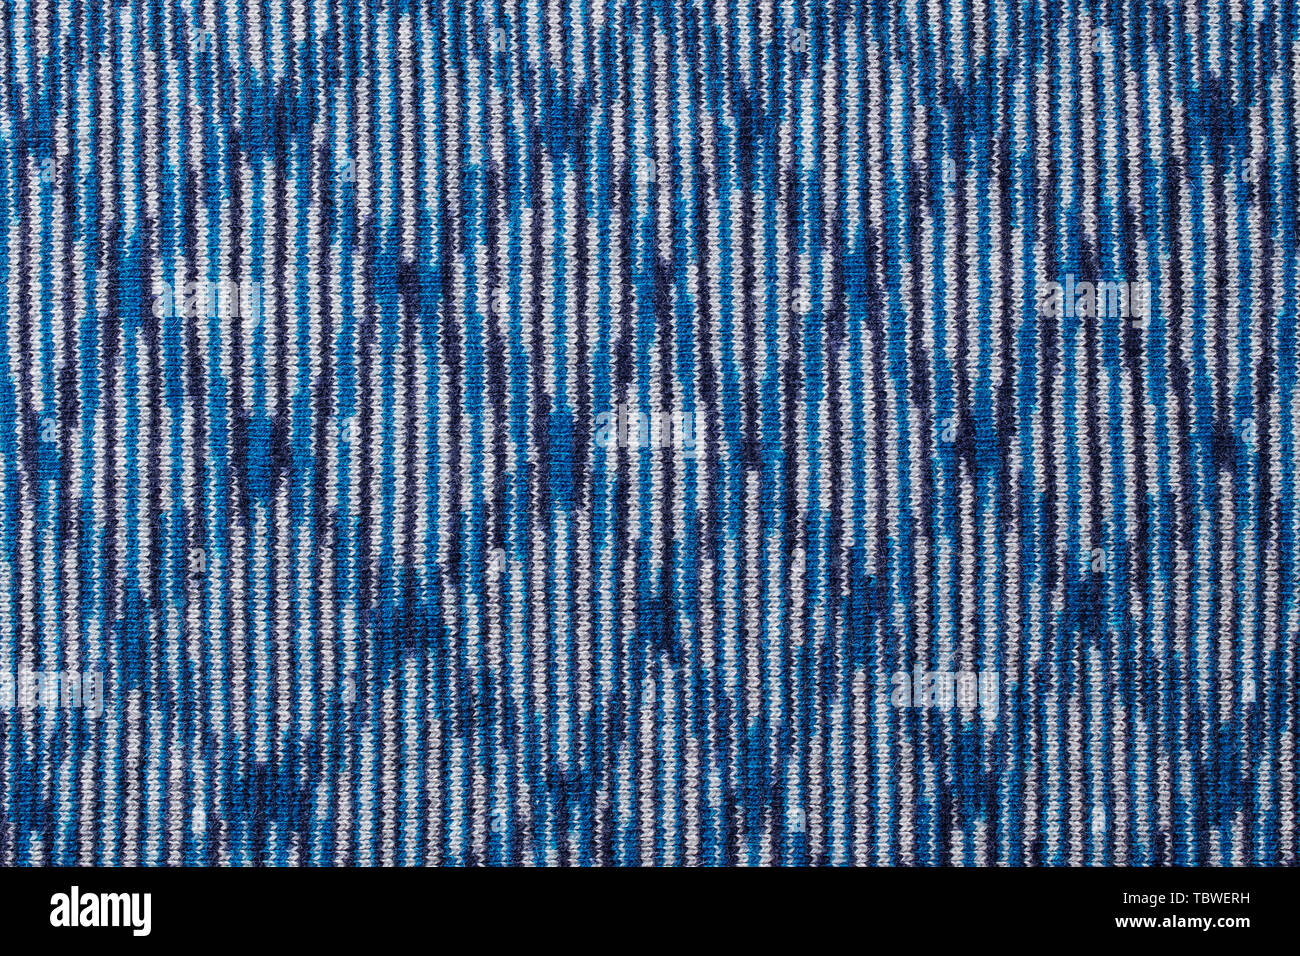 Blue knitted wool texture background pattern with high resolution. Top view. Copy space. Stock Photo